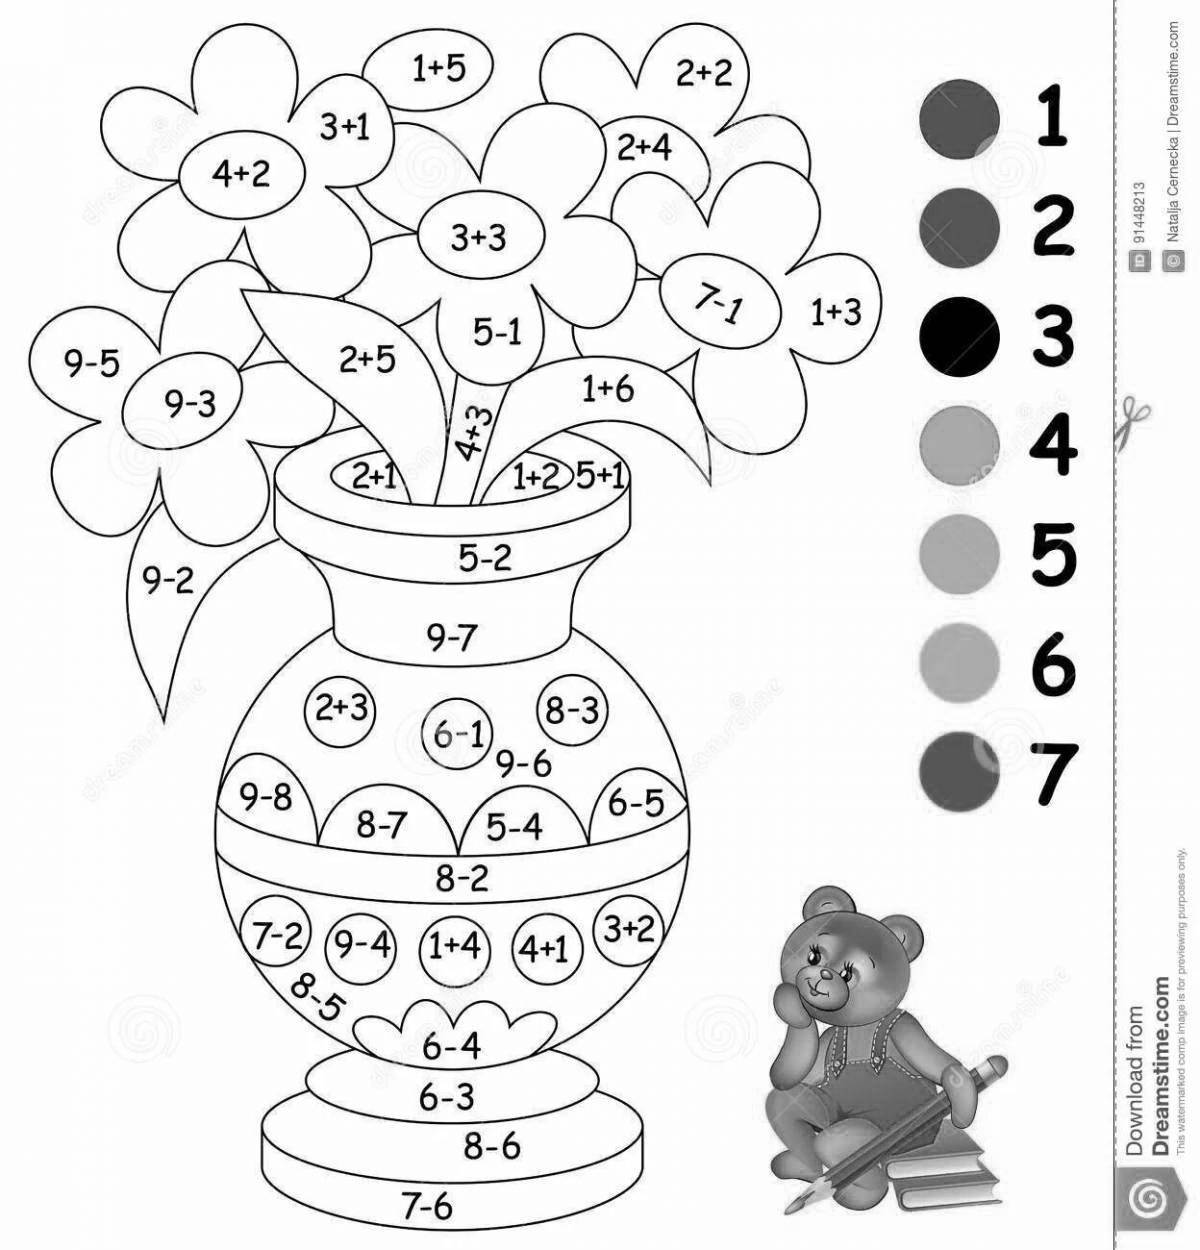 Entertaining math coloring book for preschoolers 5-6 years old